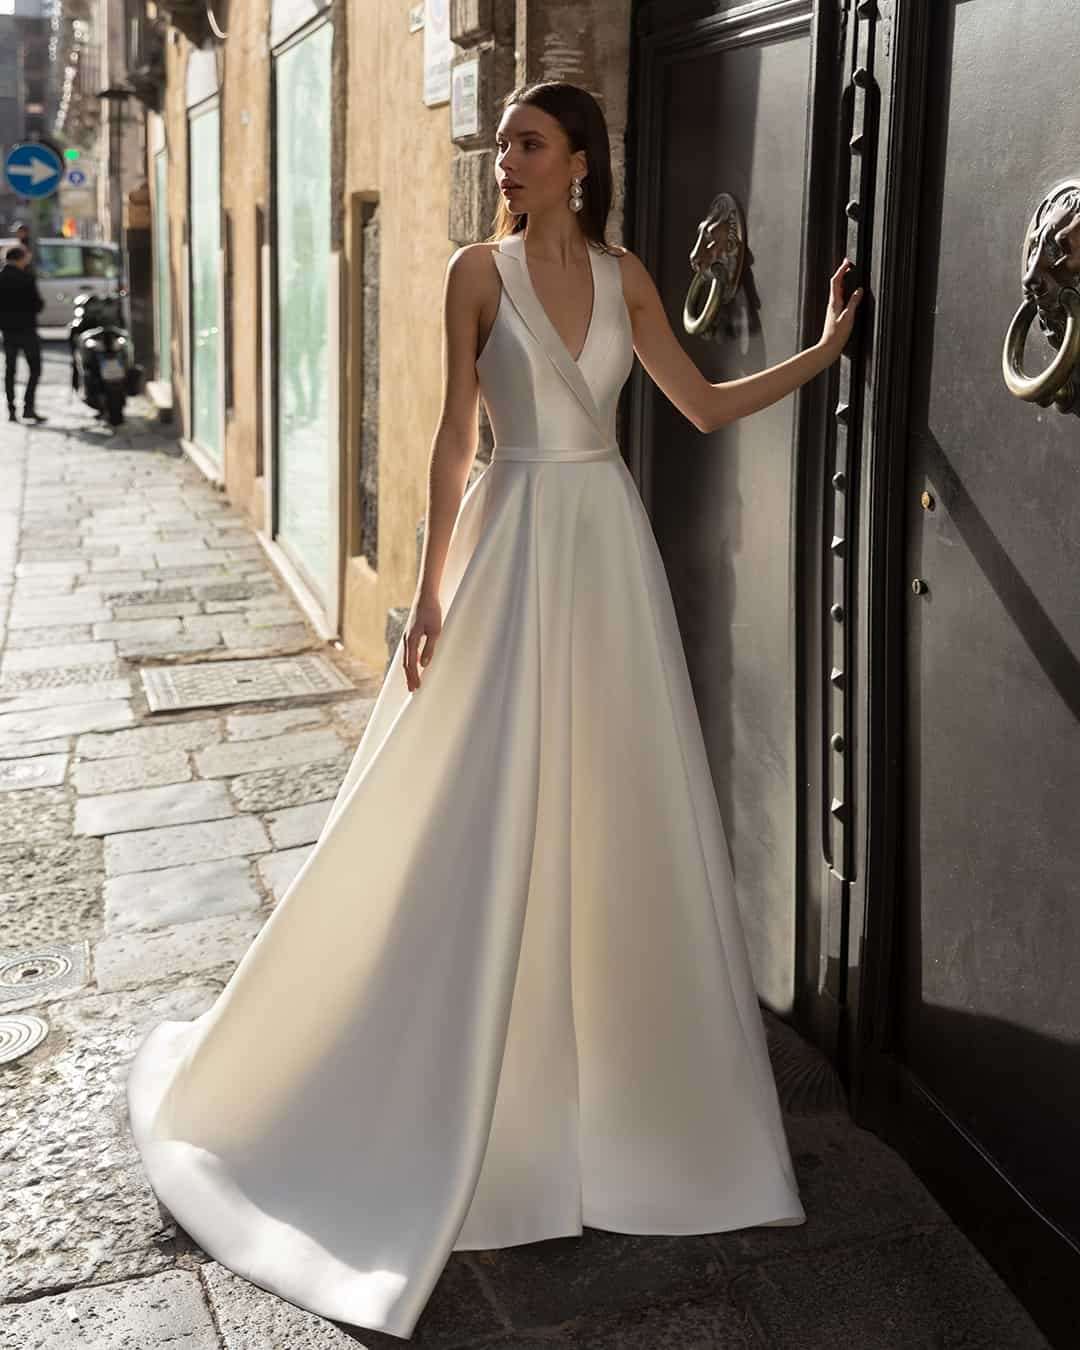 Gorgeous Bridal Gowns by Naviblue Bridal